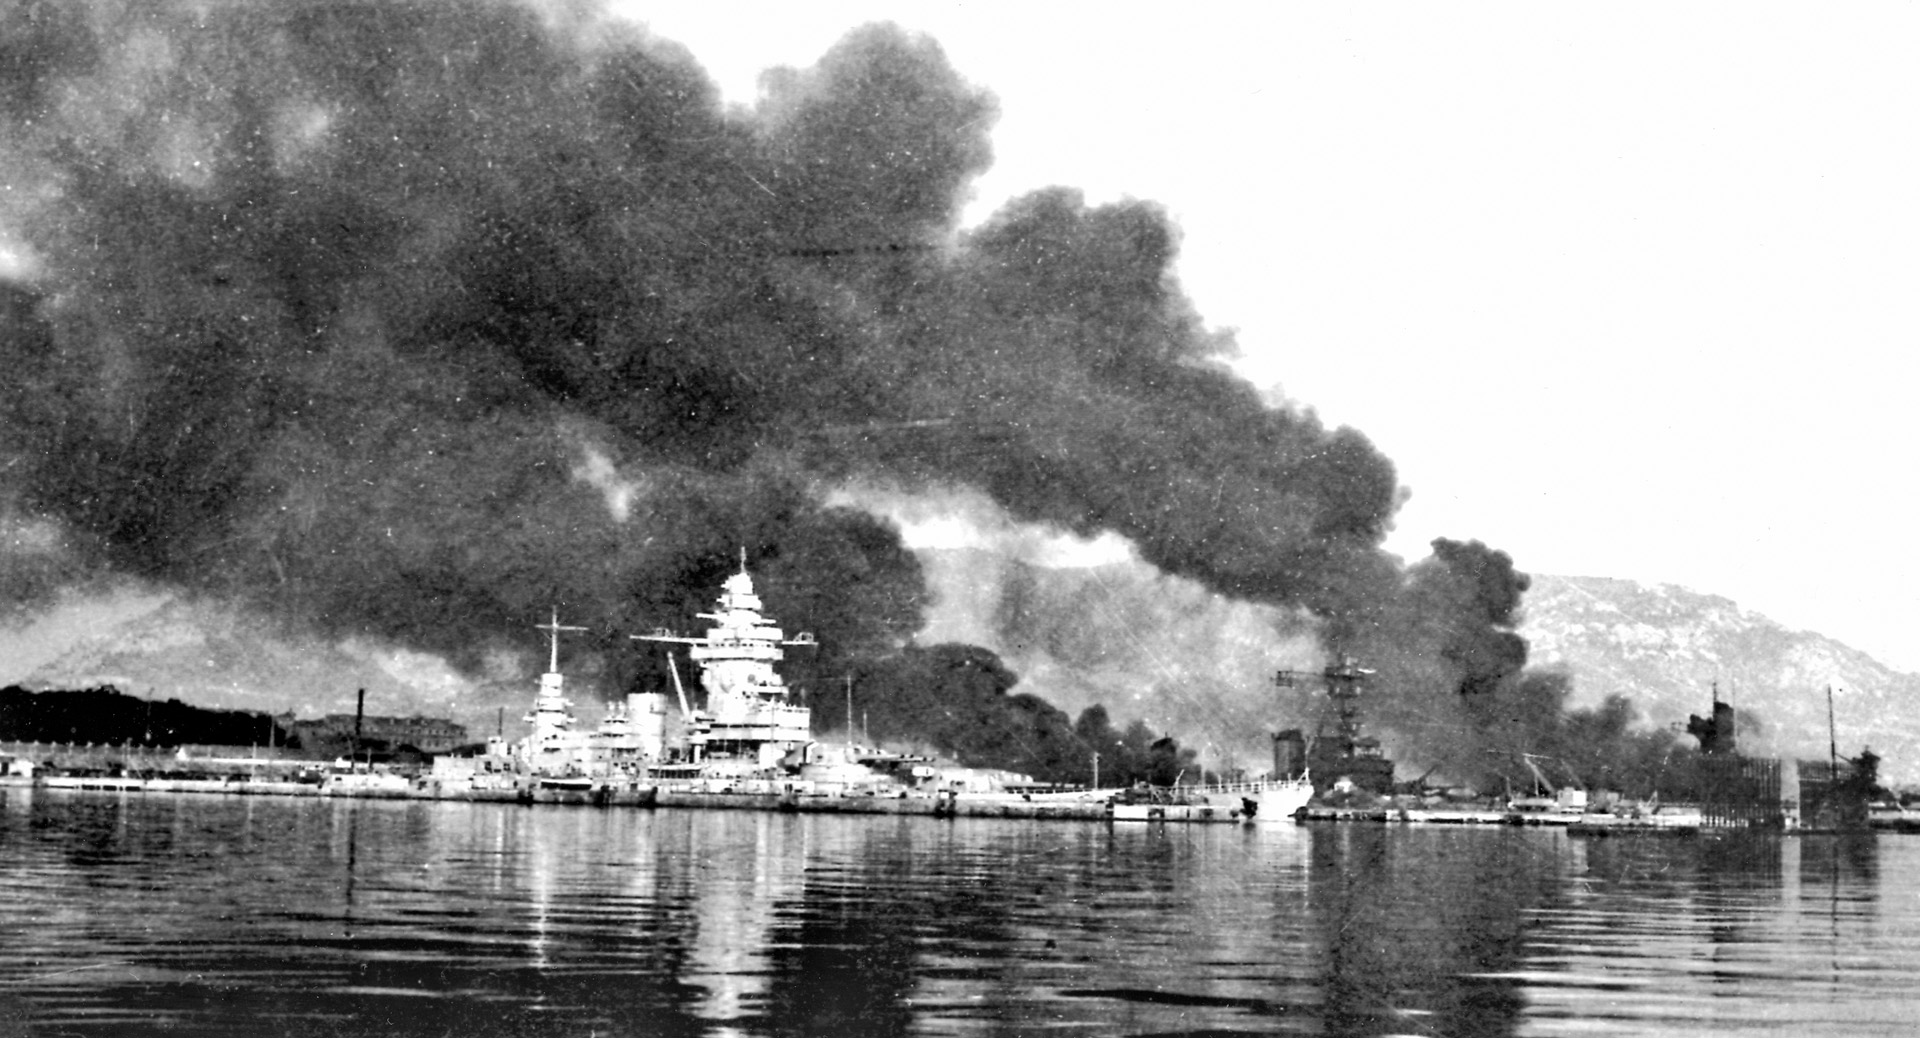 The French vessels Strasbourg, Colbert, and Algerie are seen against a backdrop of smoke and flames at Toulon. French sailors scuttled their own ships on November 27, 1942, to prevent their falling into German hands.